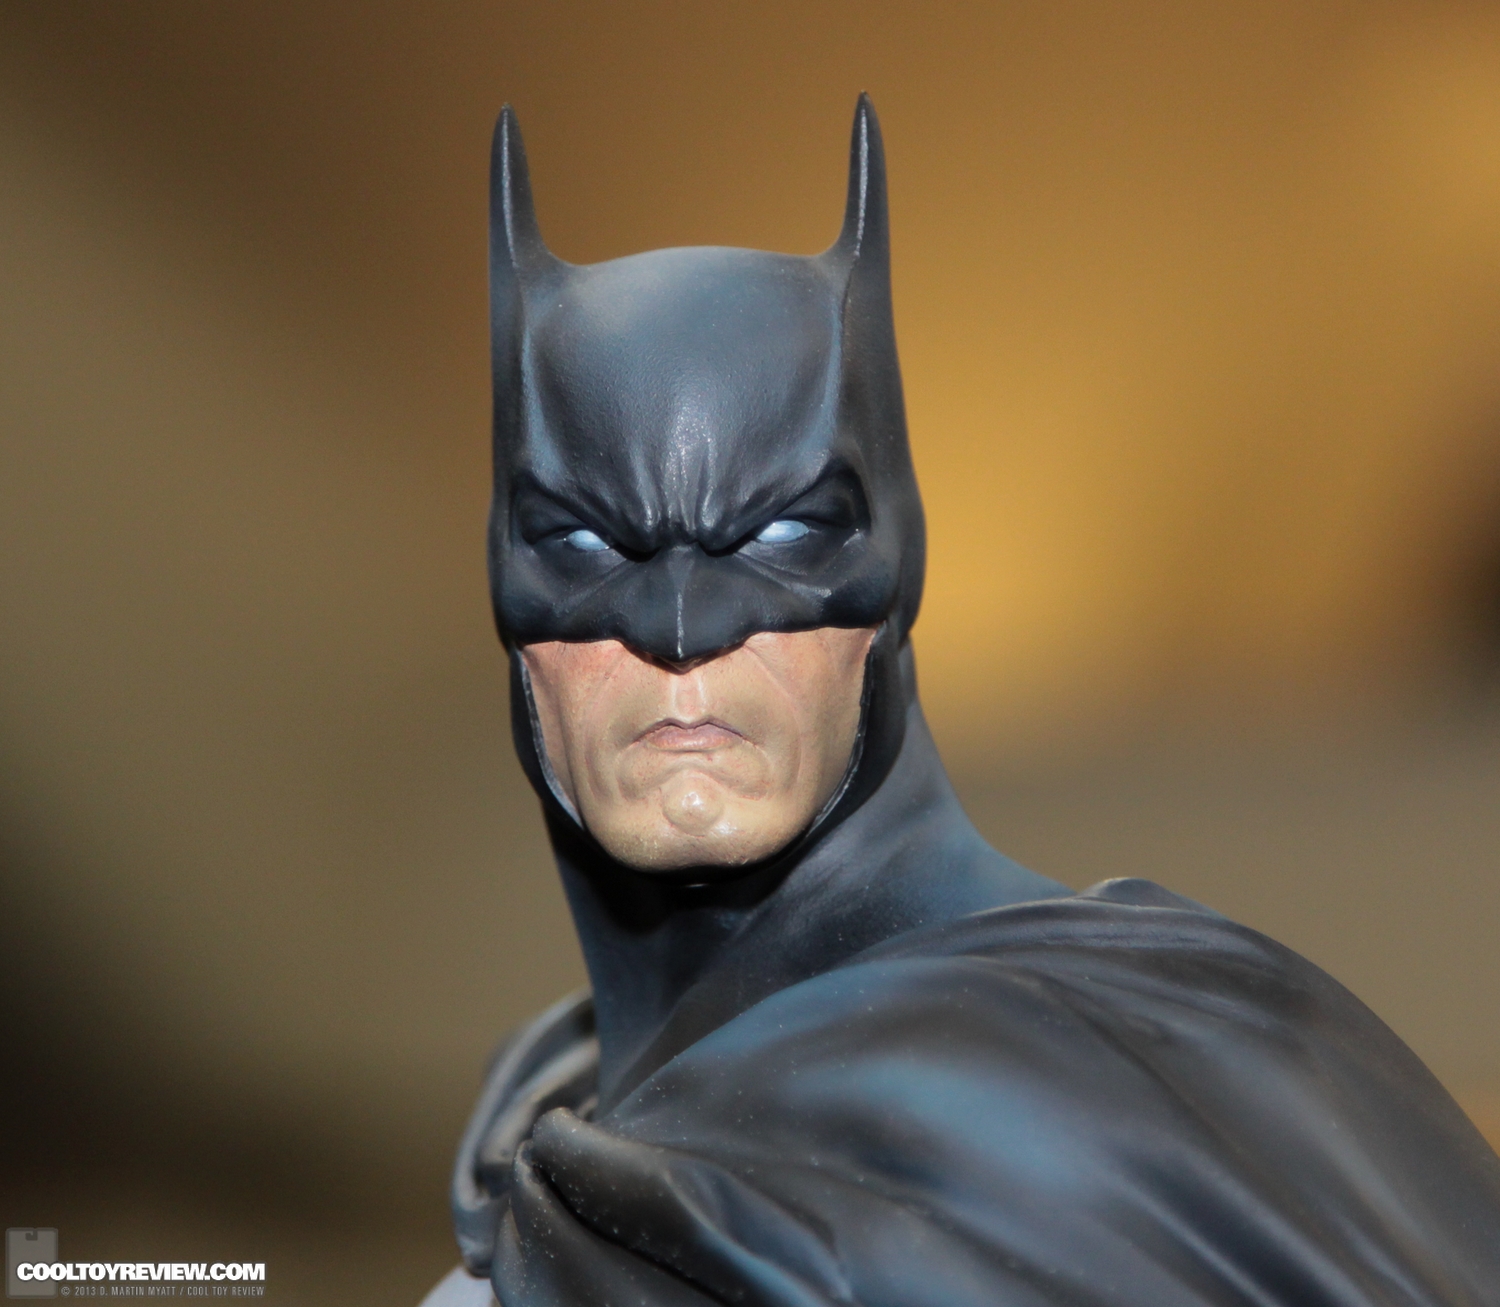 SDCC_2013_Sideshow_Collectibles_Thursday-030.jpg